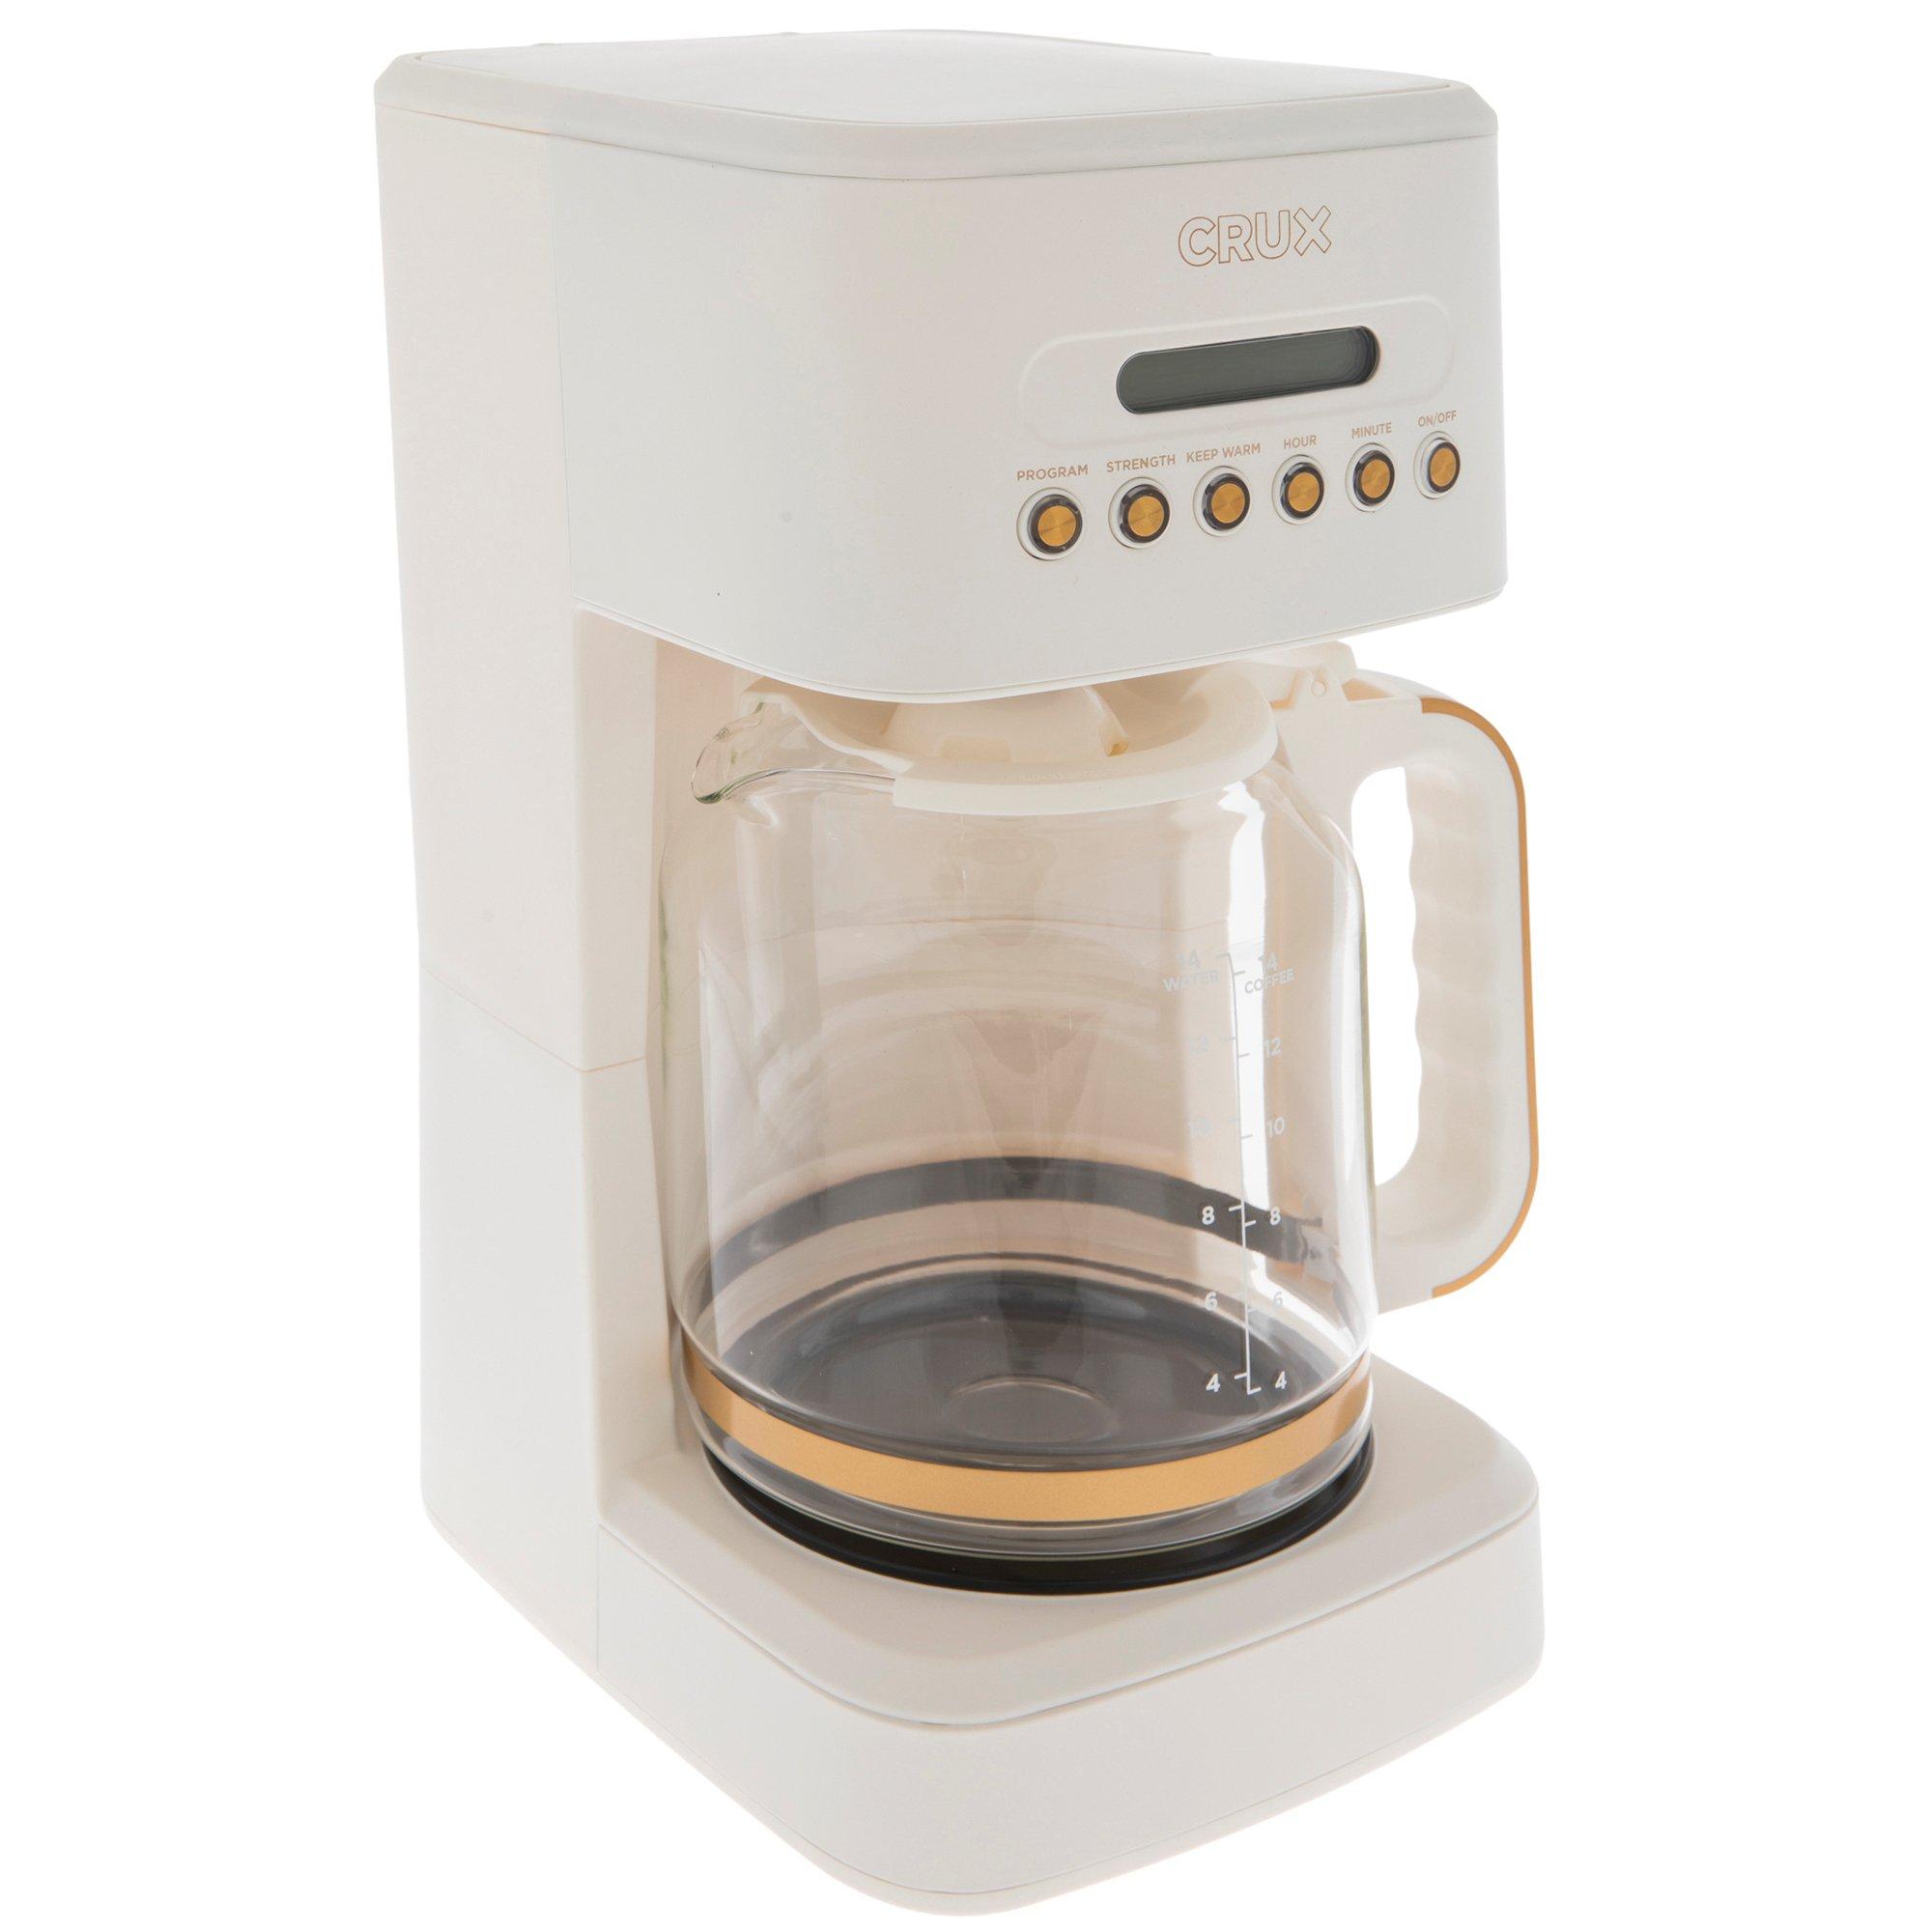 CRUX® Artisan Series 5-Cup Coffee Maker, 1 ct - Fry's Food Stores